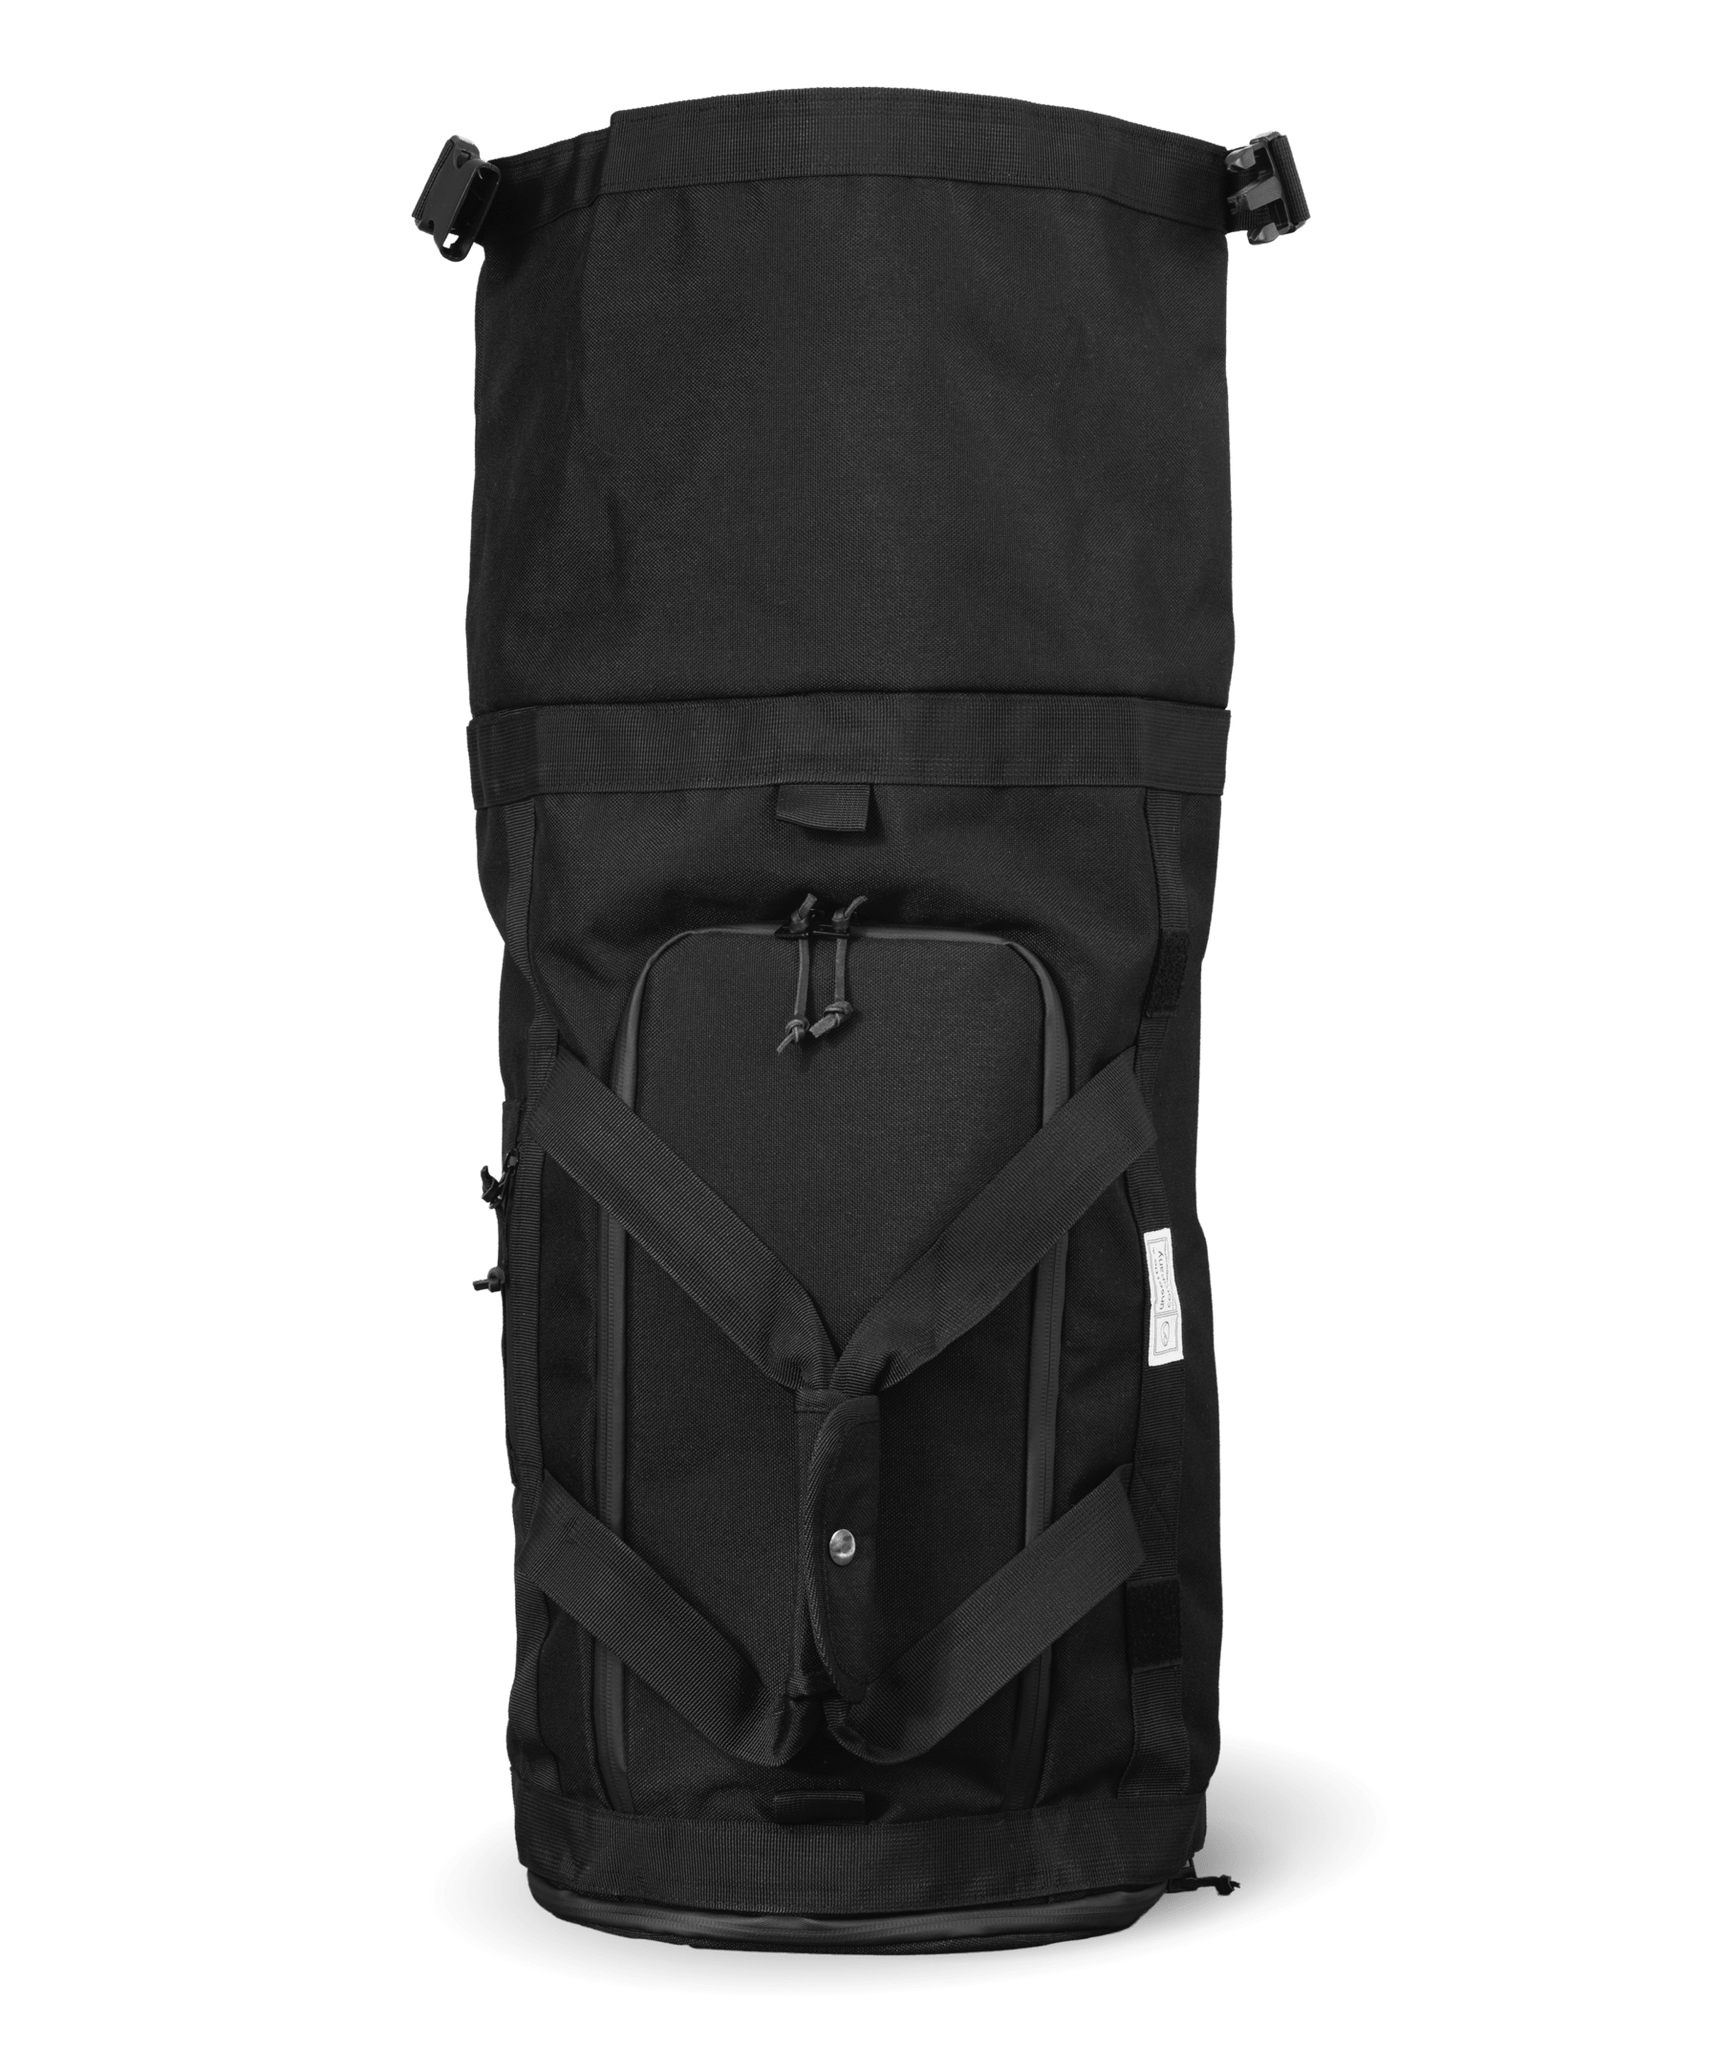 Commuter-duffle-bag-space-black-unrolled